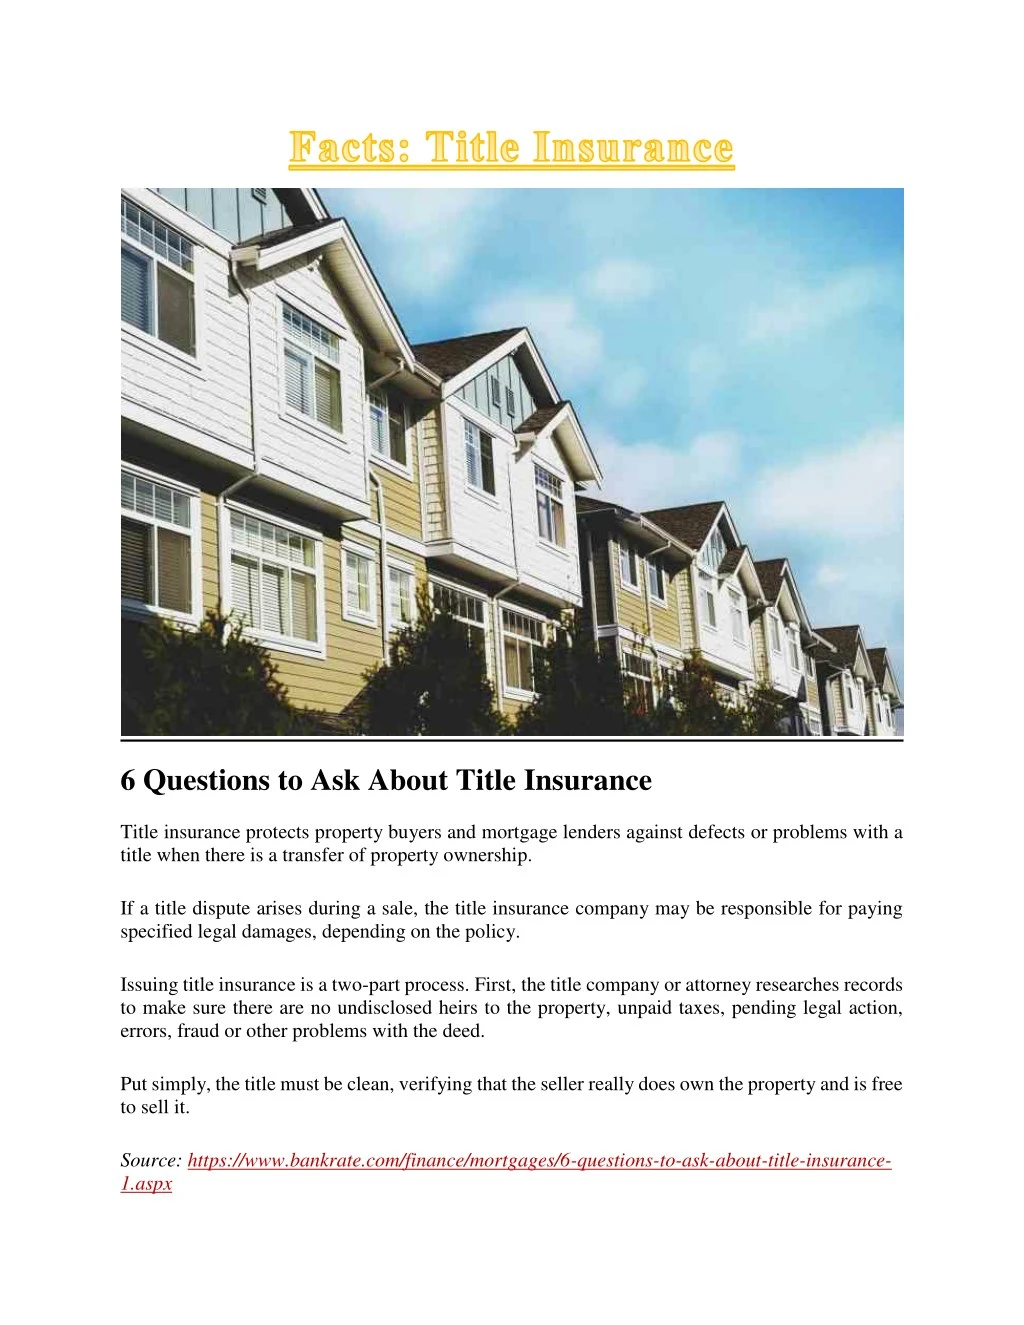 6 questions to ask about title insurance